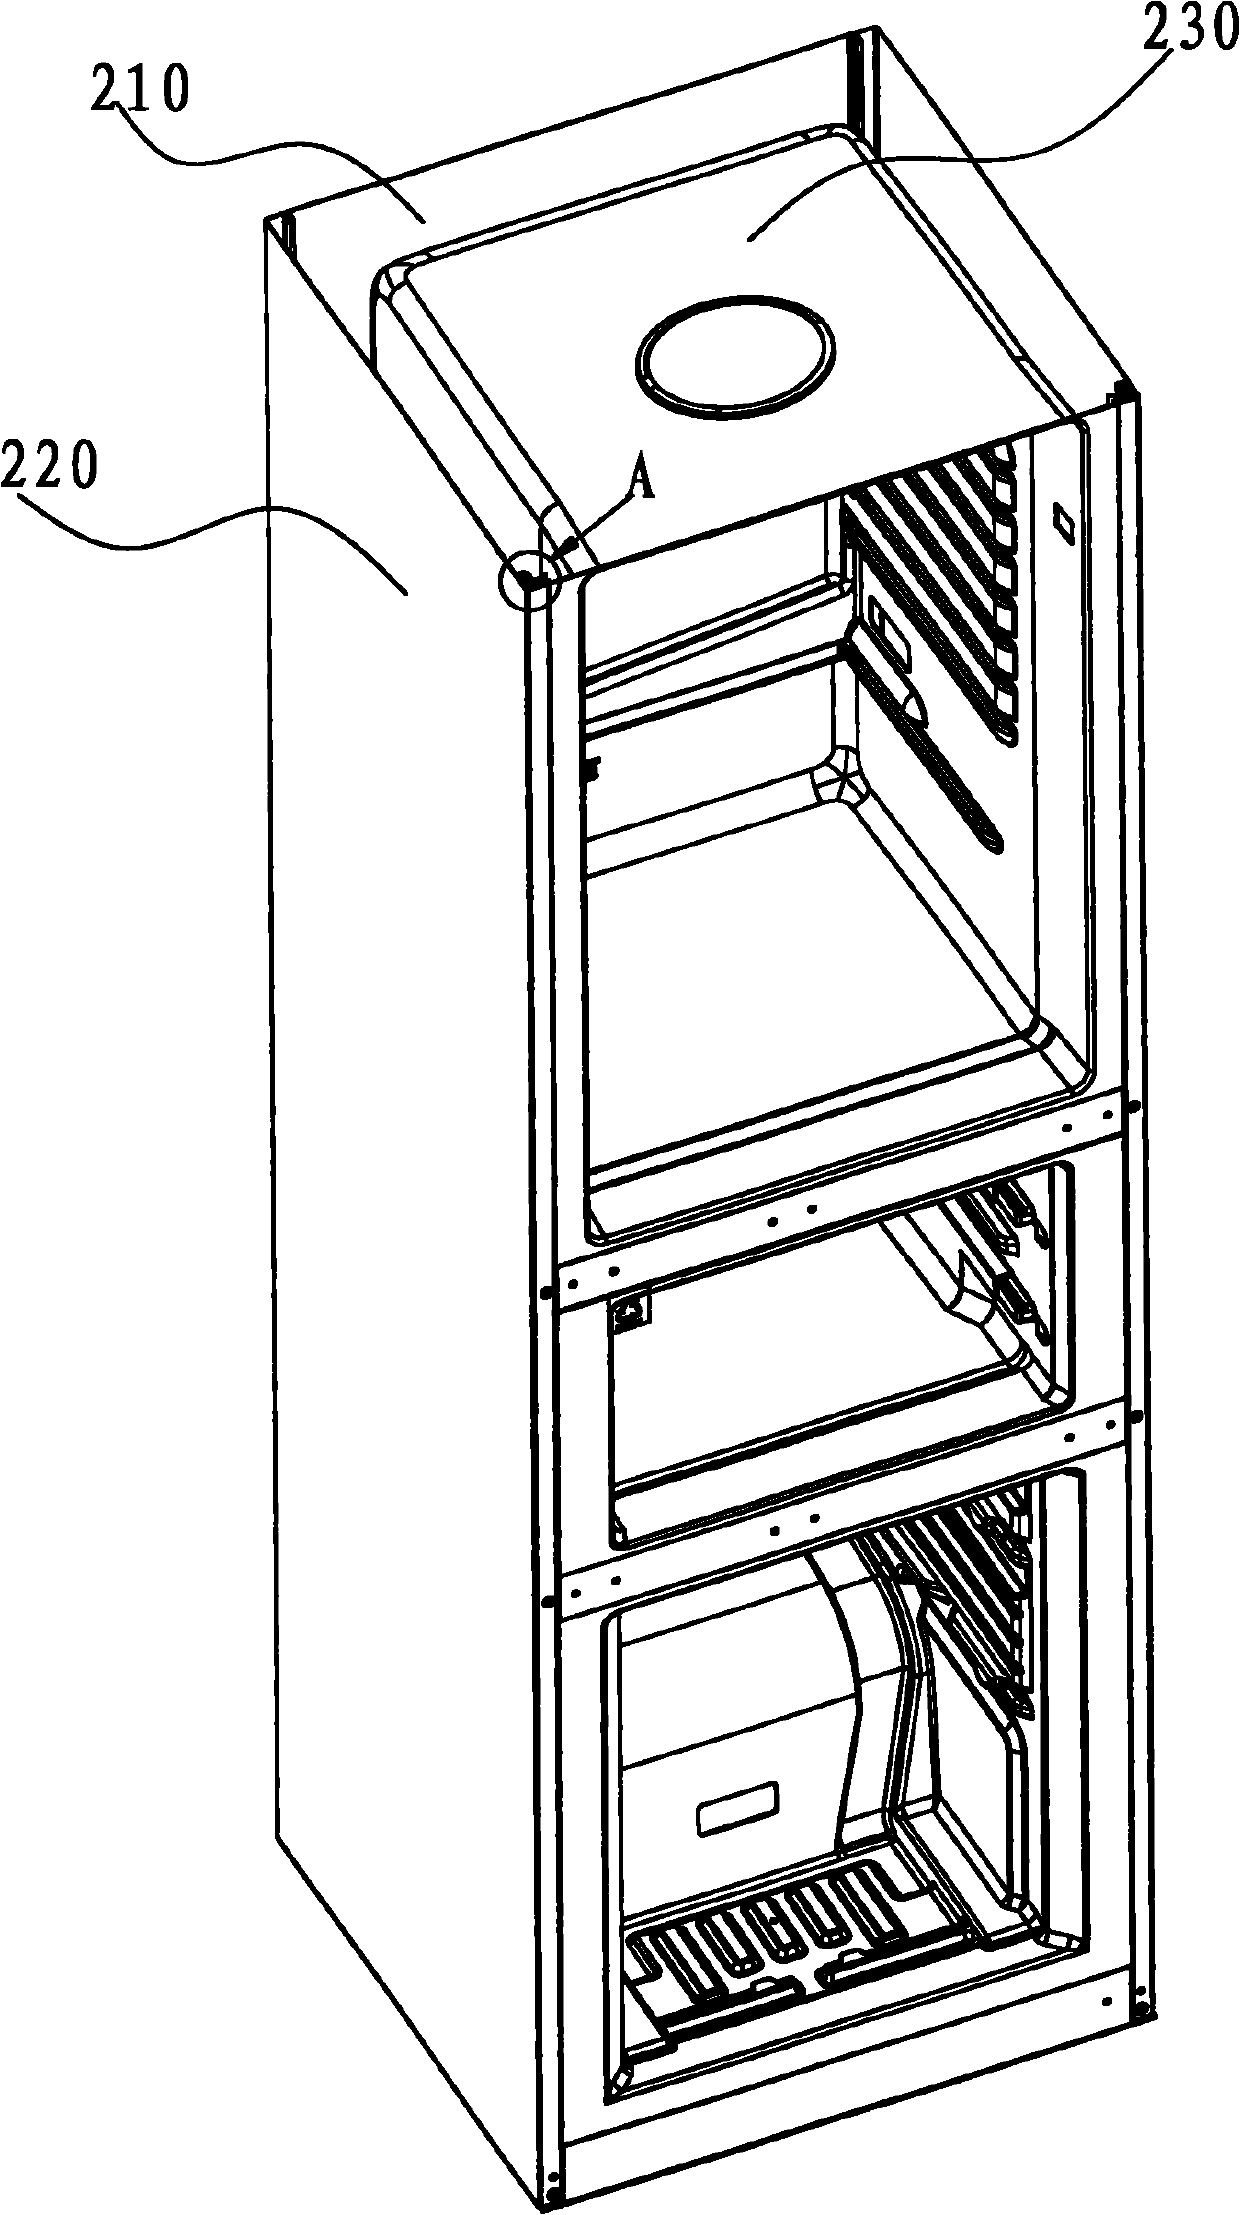 Foaming apparatus, foaming process and foaming process of refrigerating device